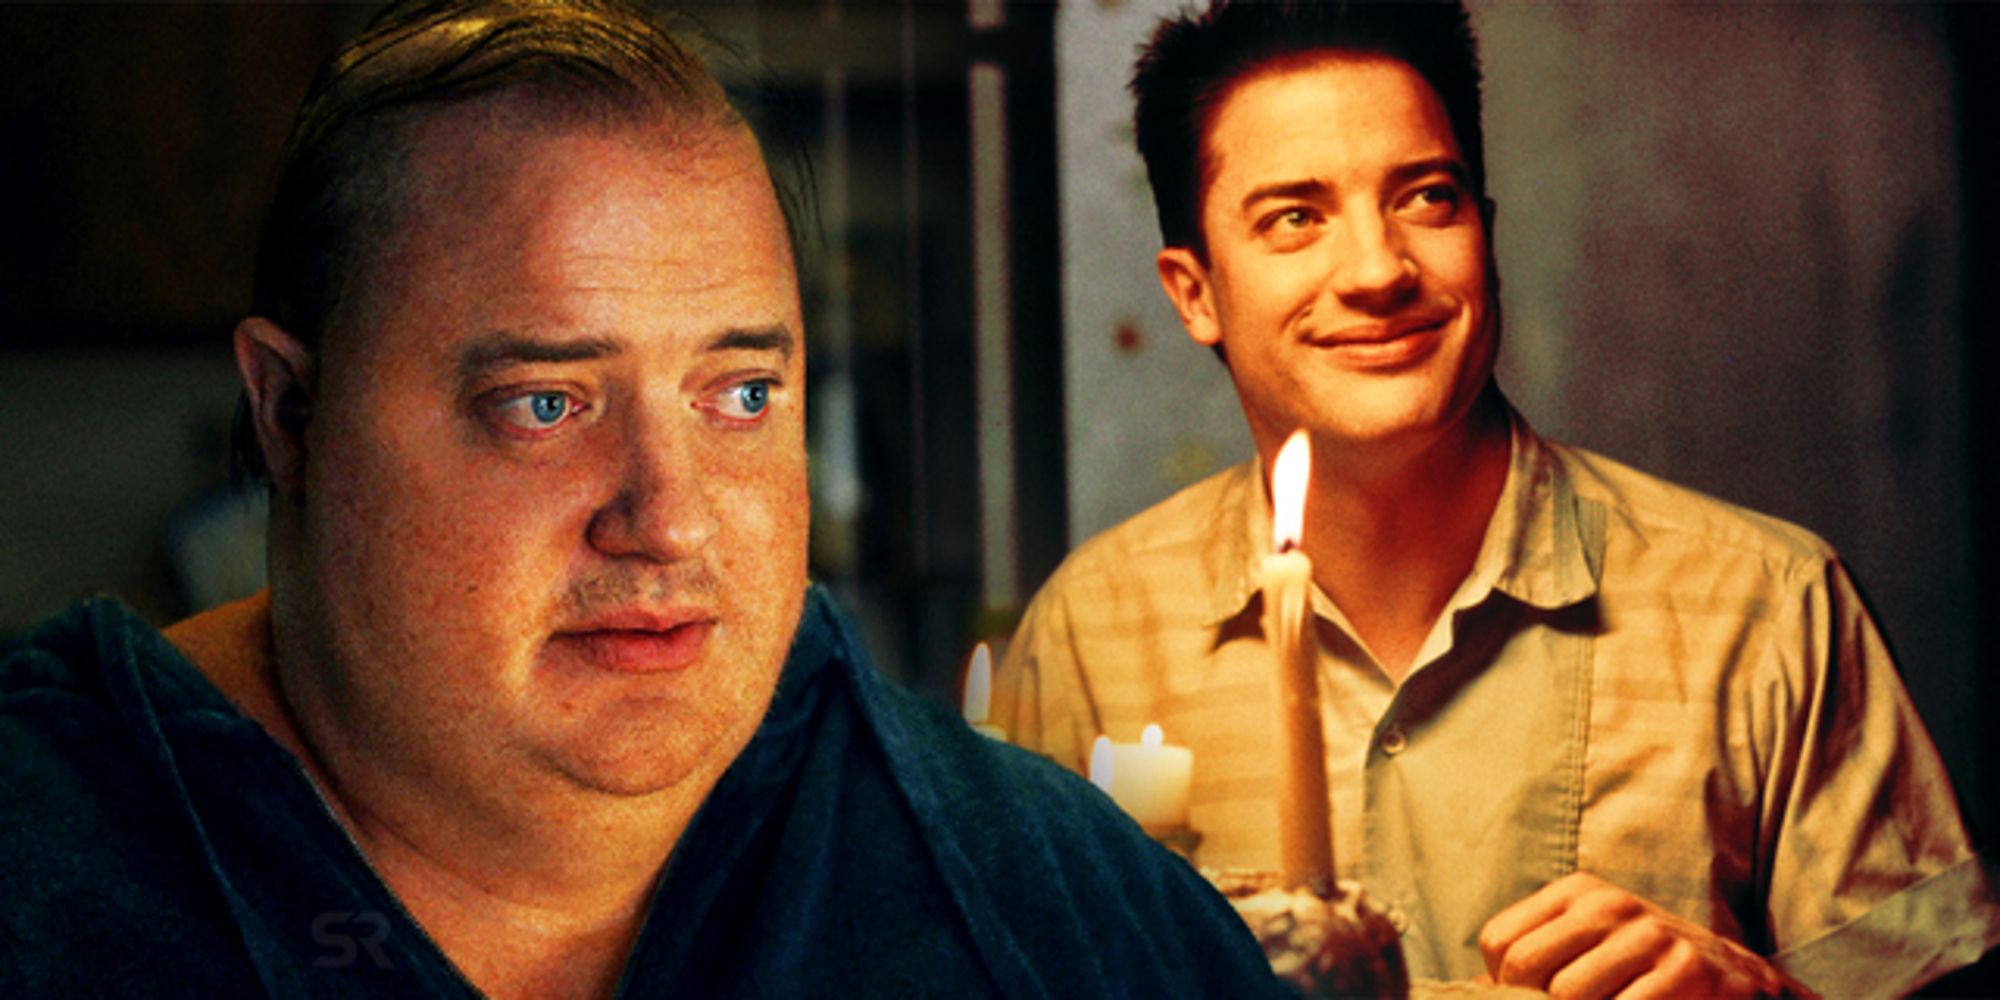 Brendan Fraser in The Whale and Blast from the Past